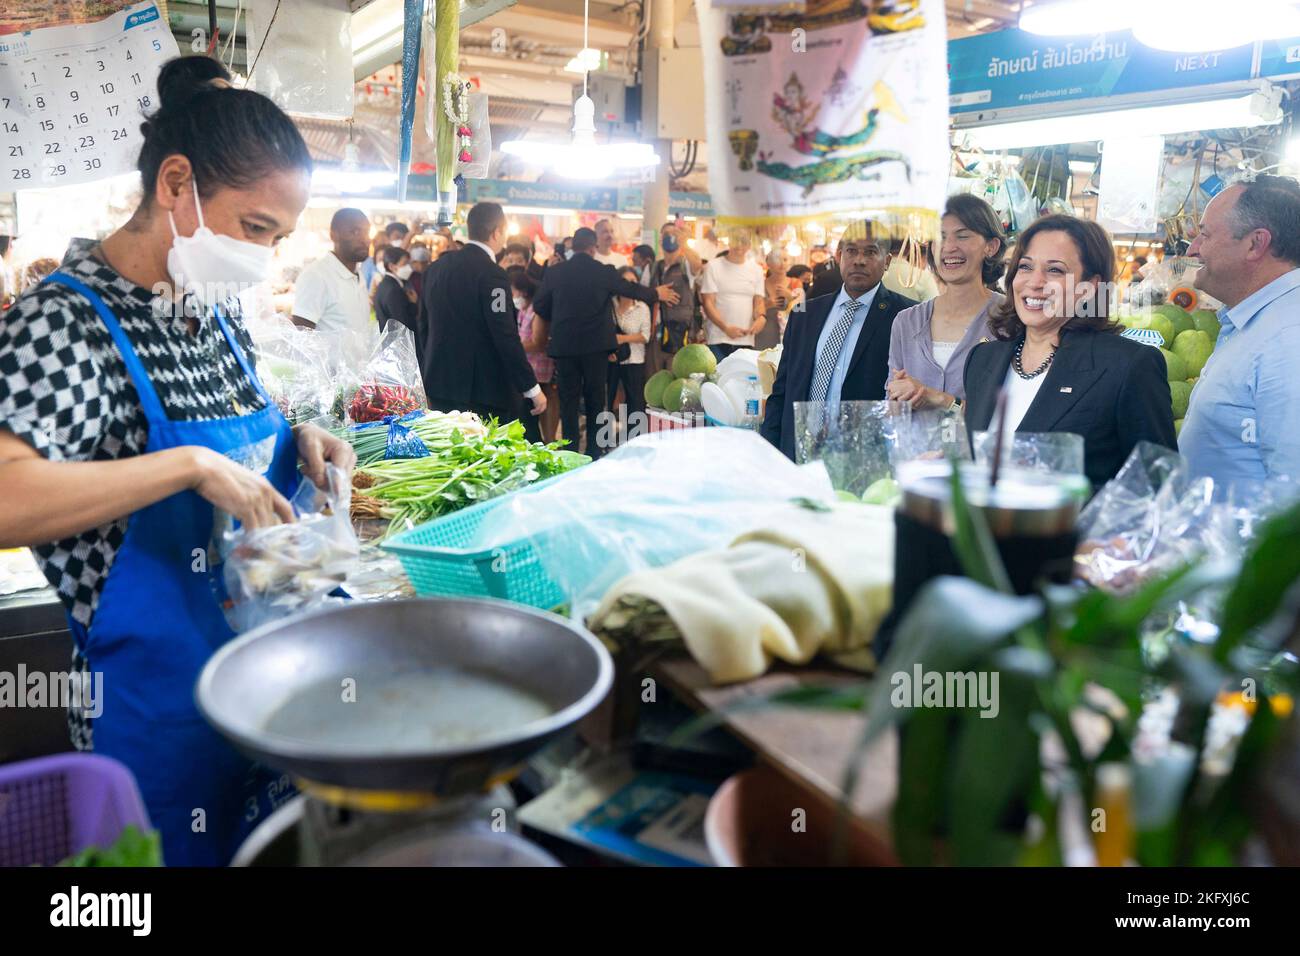 Bangkok, Thailand. 20th Nov, 2022. U.S. Vice President Kamala Harris, right, and Second Gentleman Doug Emhoff stop at an outdoor food stall following the APEC Summit, November 20, 2022, in Bangkok, Thailand. The Vice President walked through the traditional market speaking with shopkeepers and purchased Thai green curry paste to bring home. Credit: Lawrence Jackson/White House Photo/Alamy Live News Stock Photo